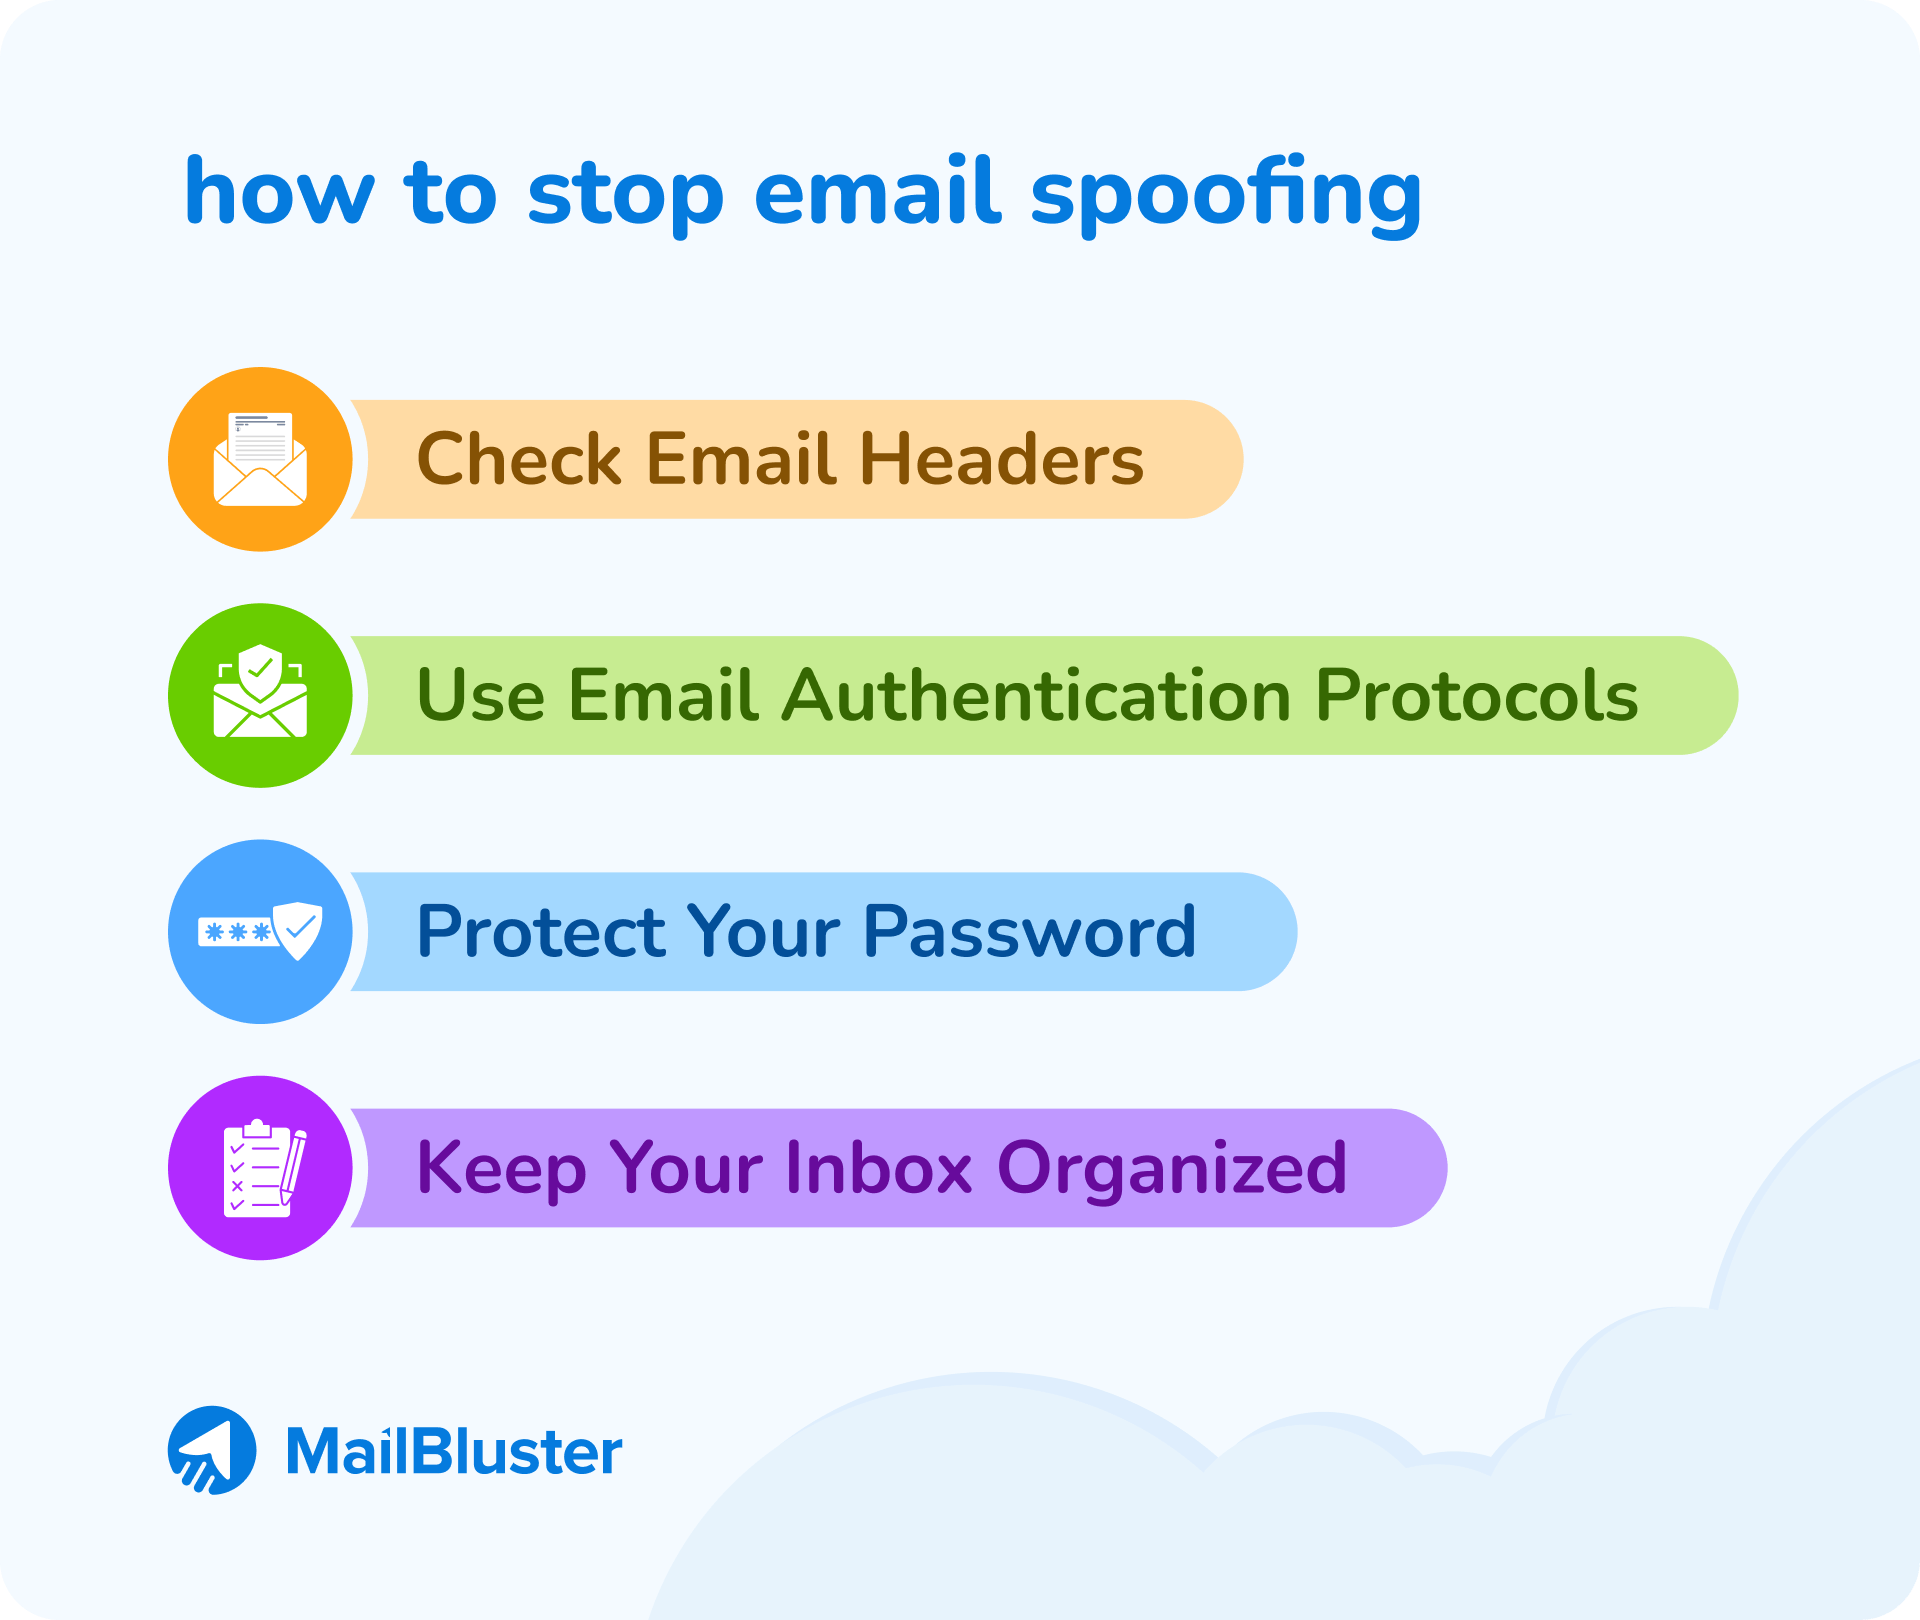 Steps of Email Spoofing